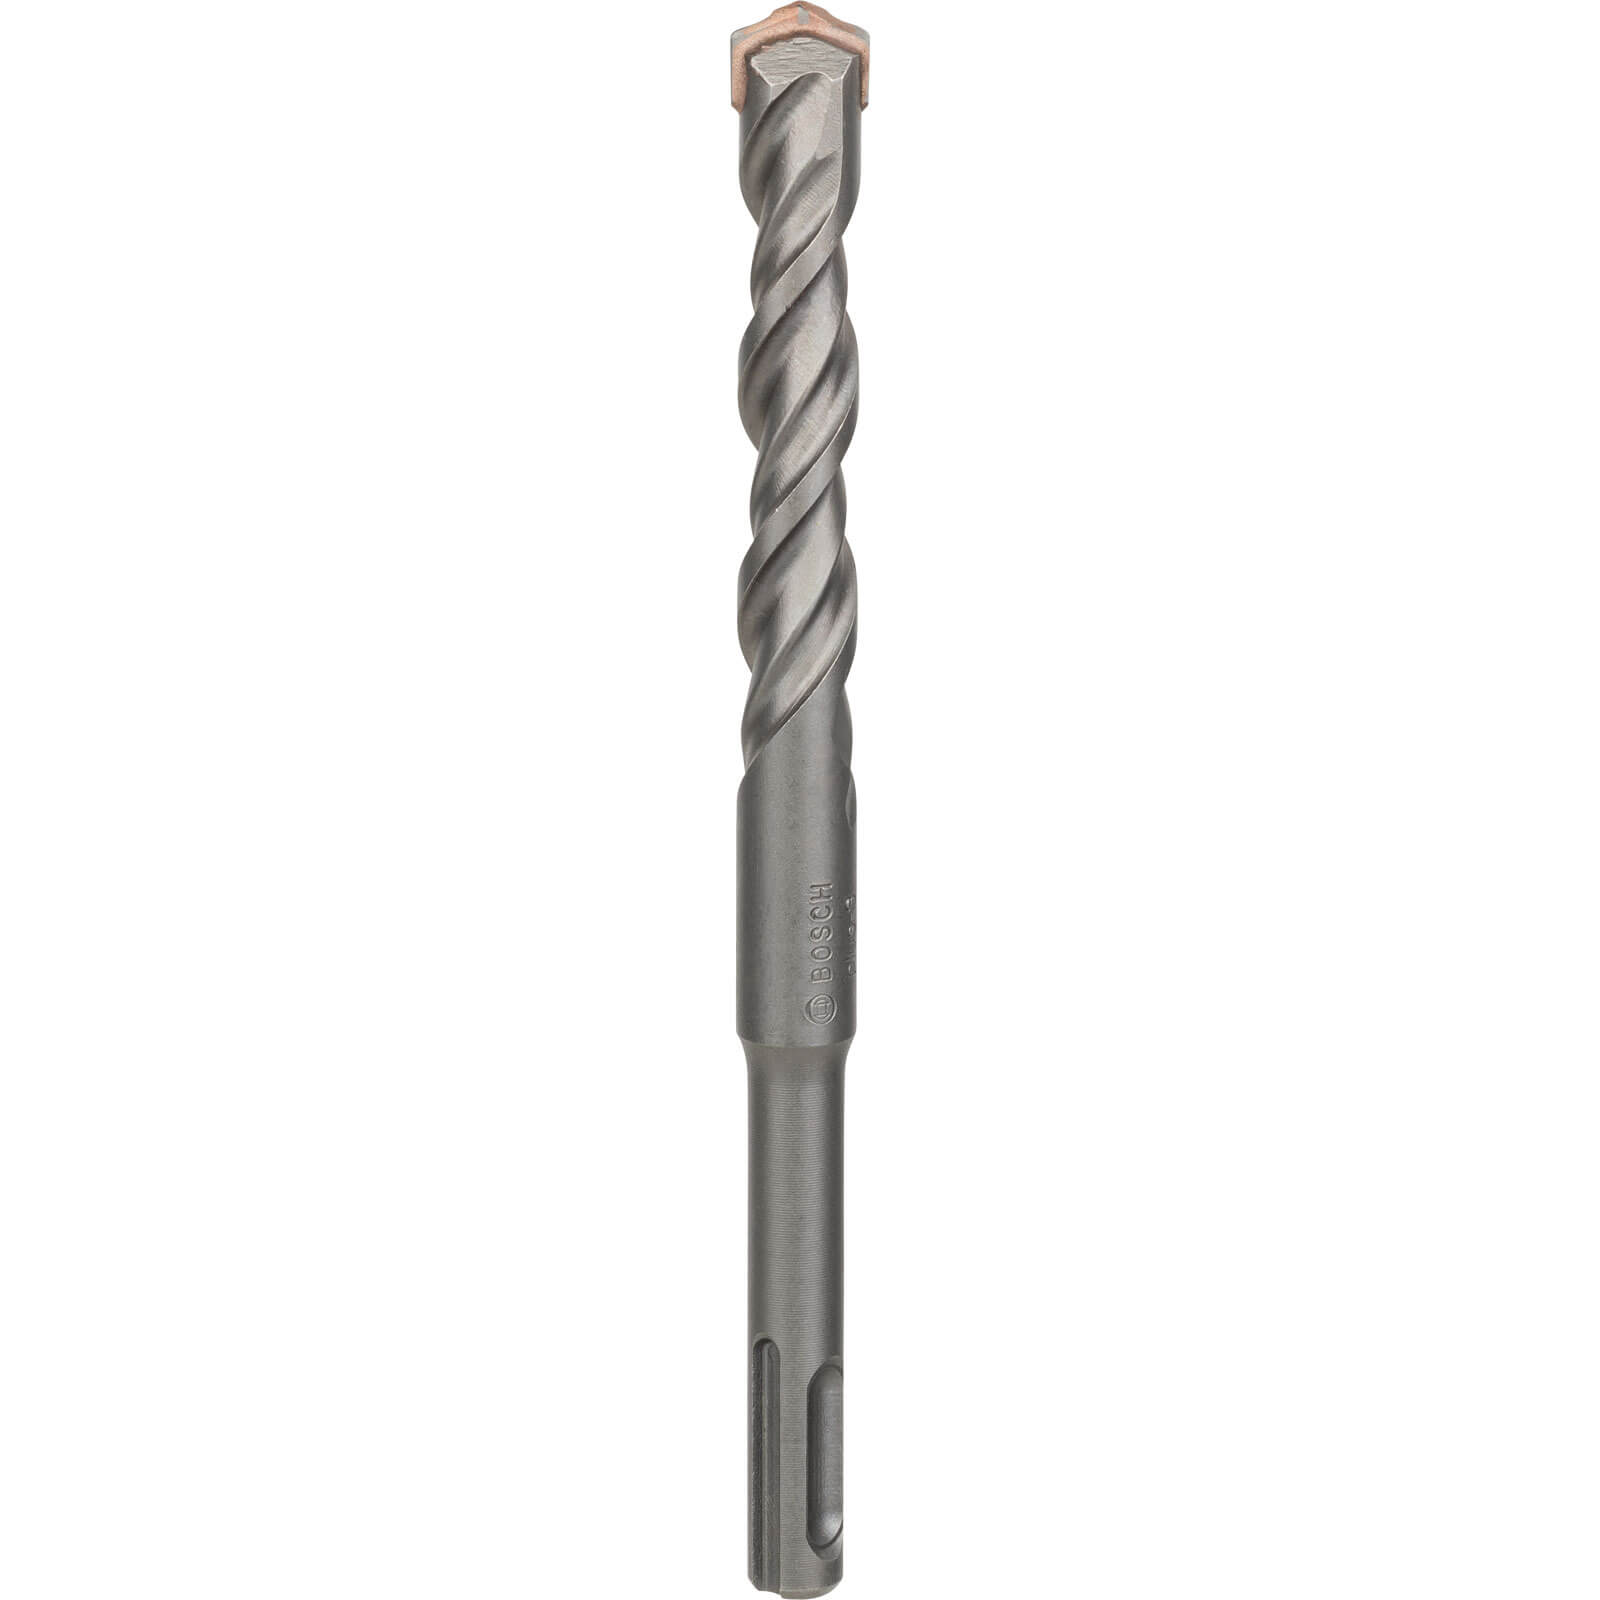 Image of Bosch Series 3 SDS Plus Masonry Drill Bit 14mm 160mm Pack of 1